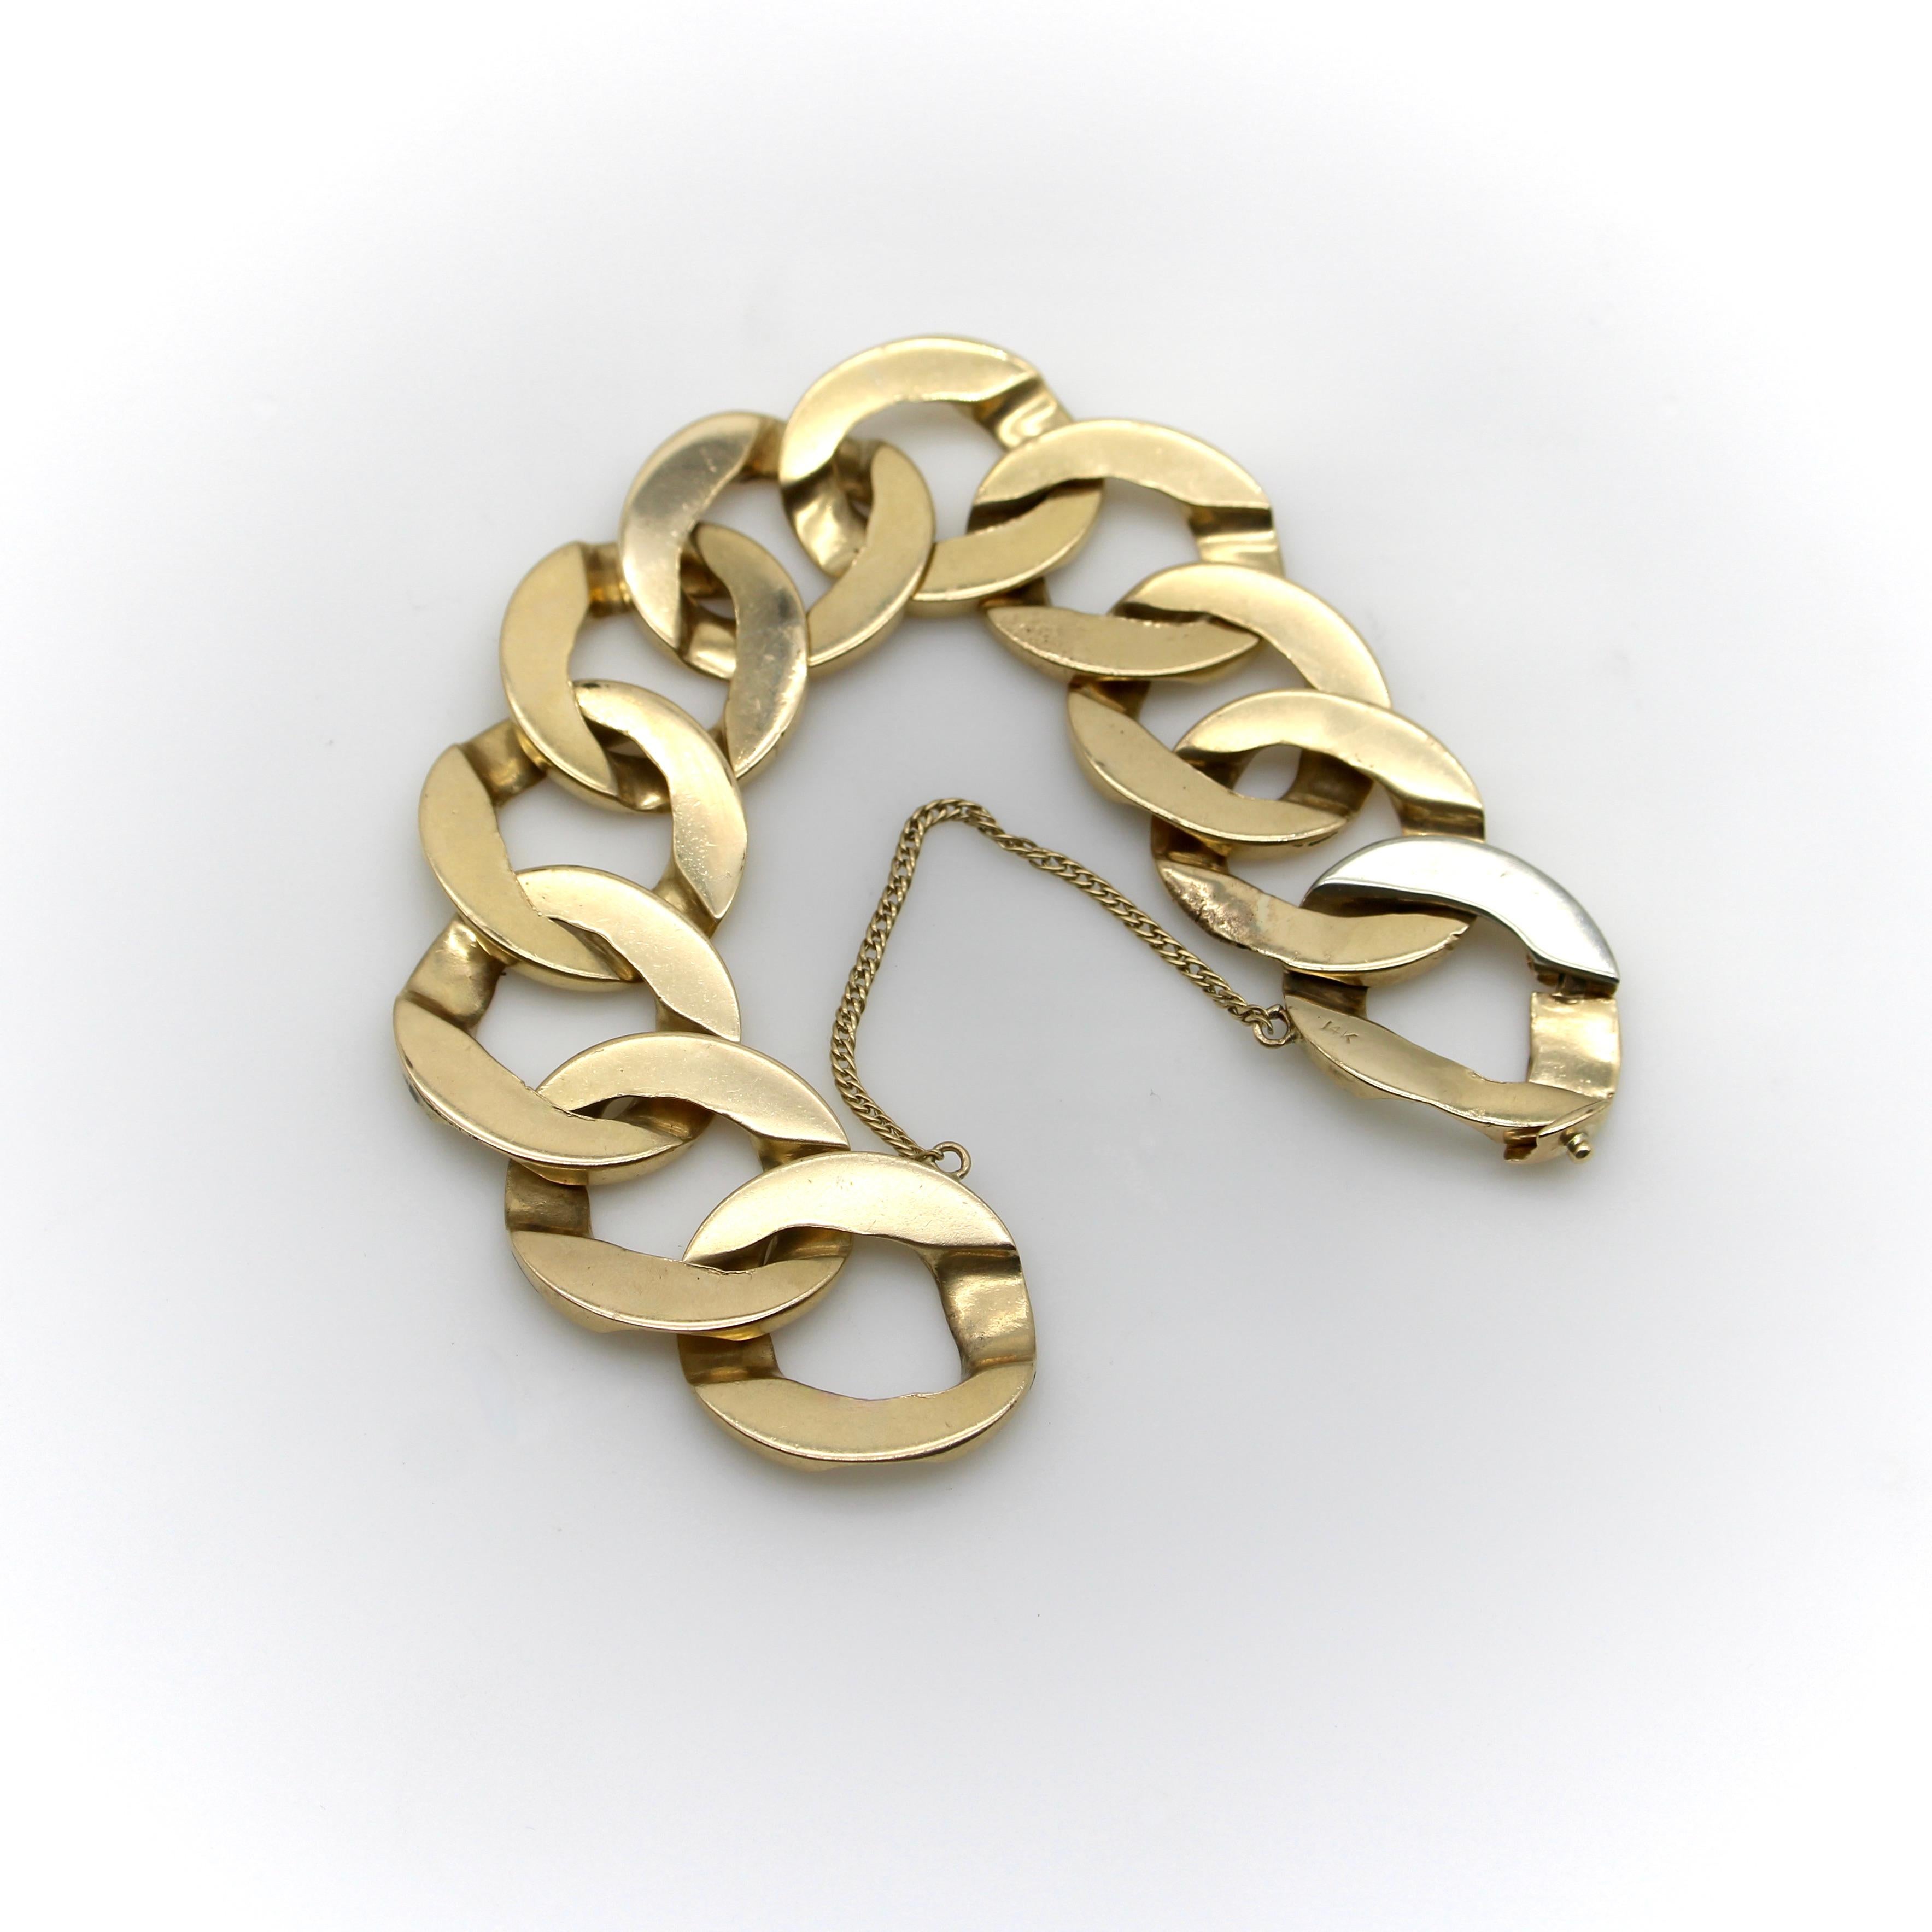 Vintage 14K Gold Wide Flattened Curb Link Bracelet  In Good Condition For Sale In Venice, CA